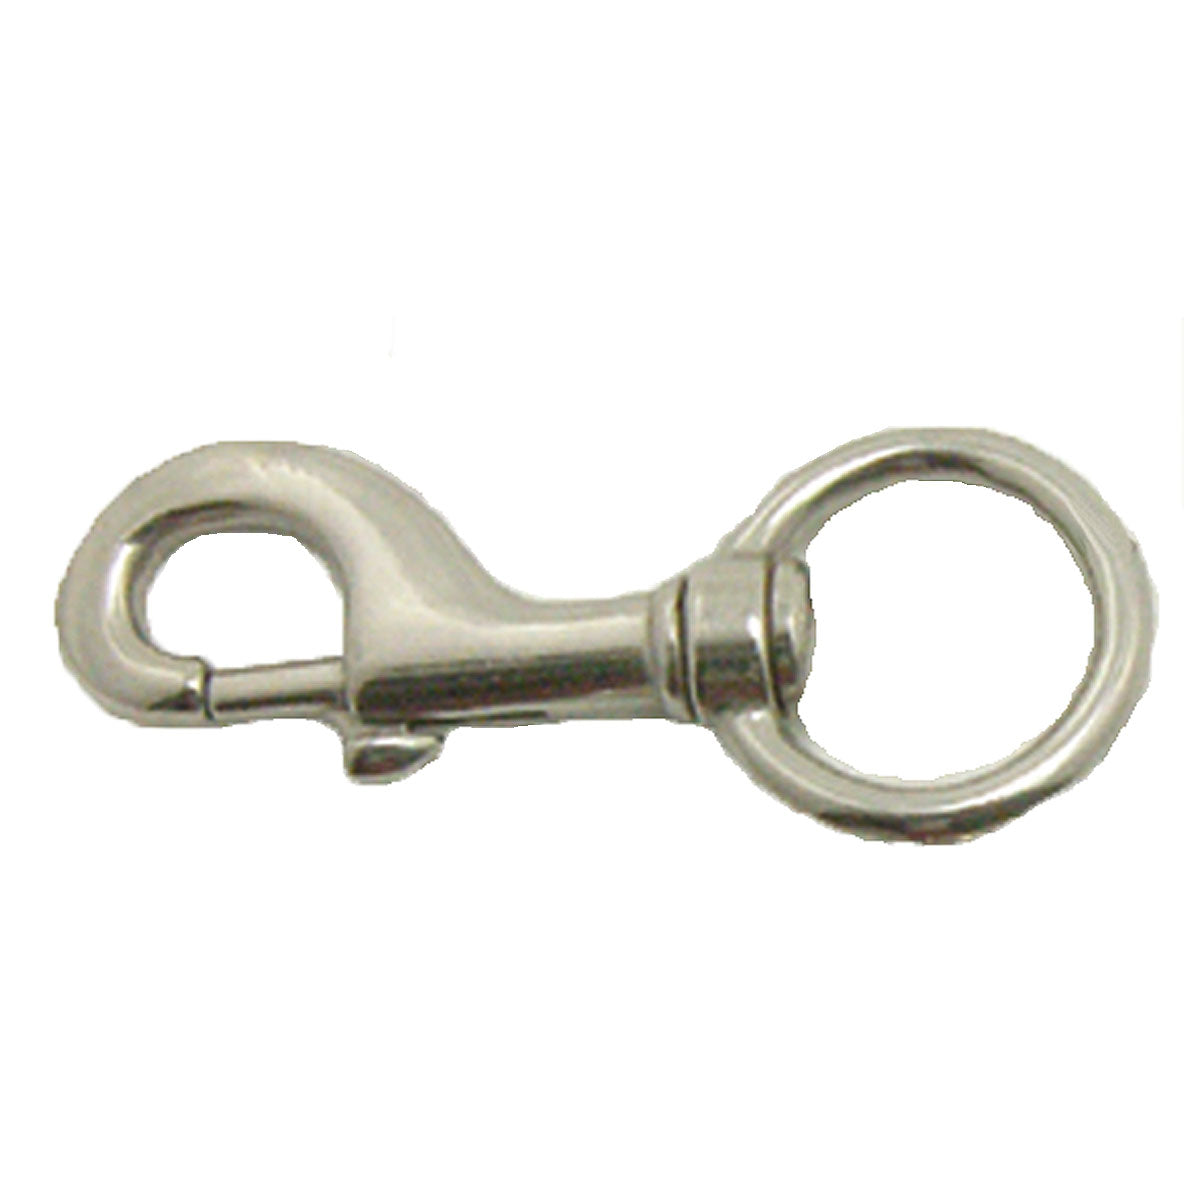 #225 Stainless Steel Snap 1-1/4"